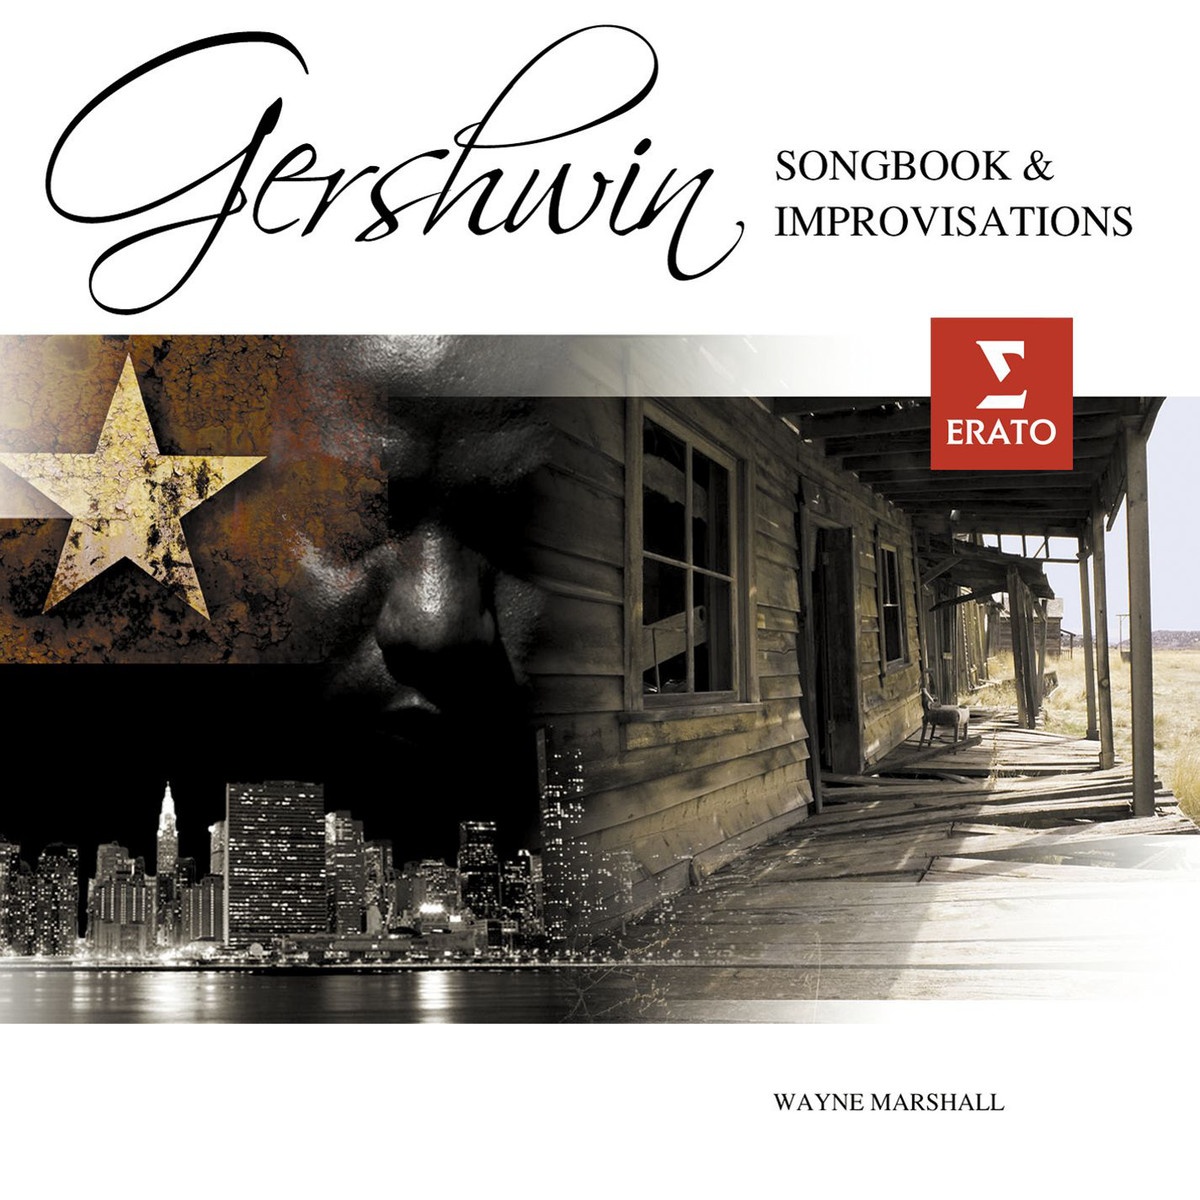 A Gershwin Songbook: improvisations on songs by George Gershwin: Embraceable you (Girl Crazy)